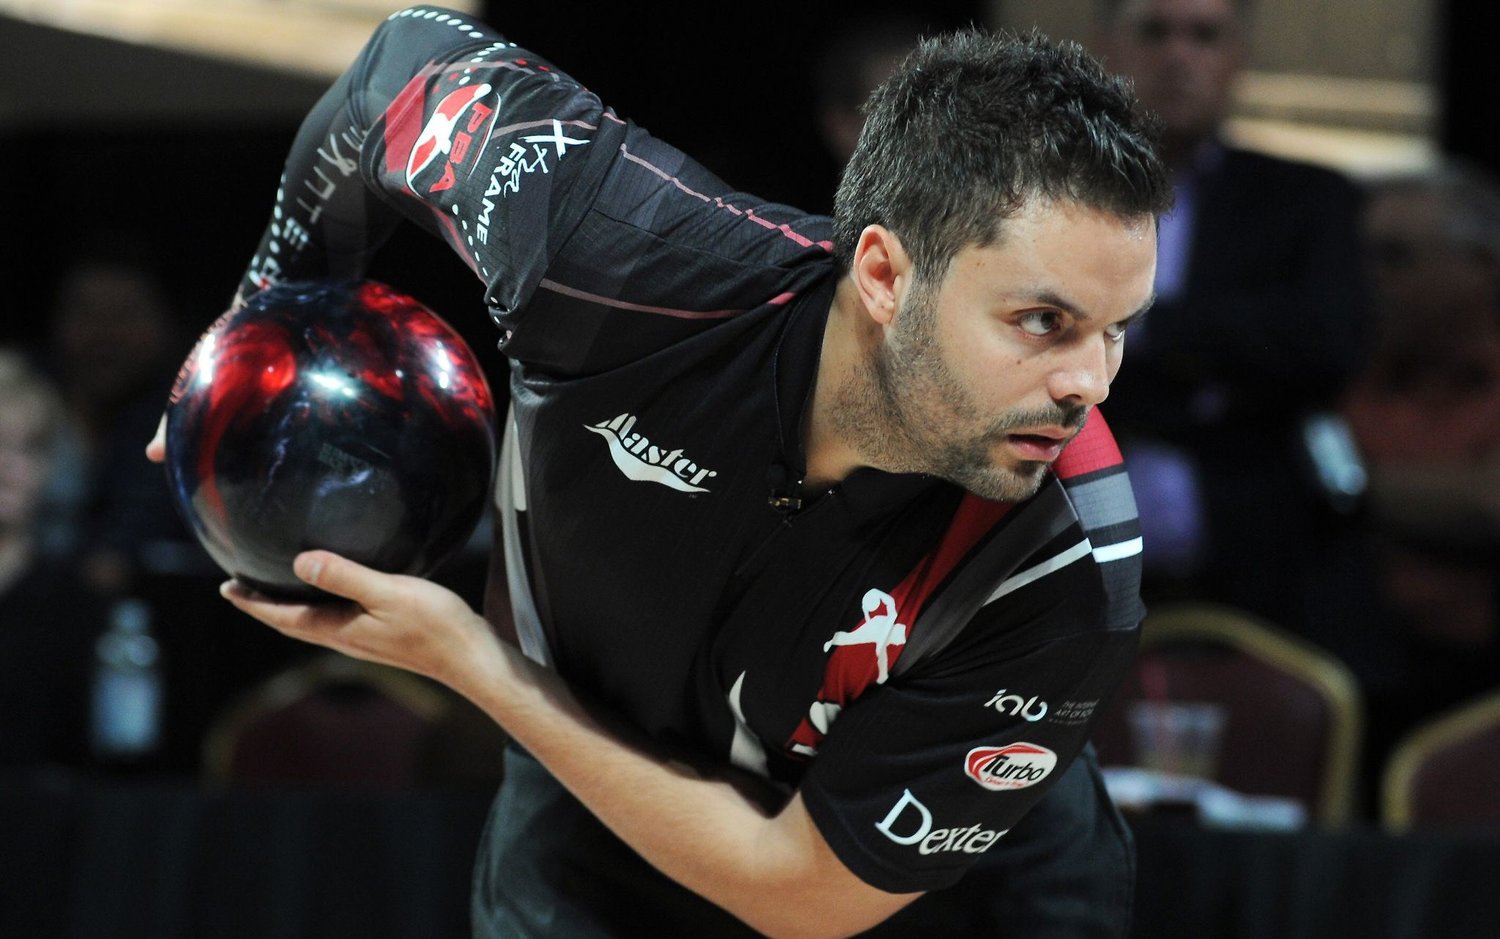 Professional Bowling Association (PBA) Champion Jason Belmonte shows his technique with the two-handed style of bowling.